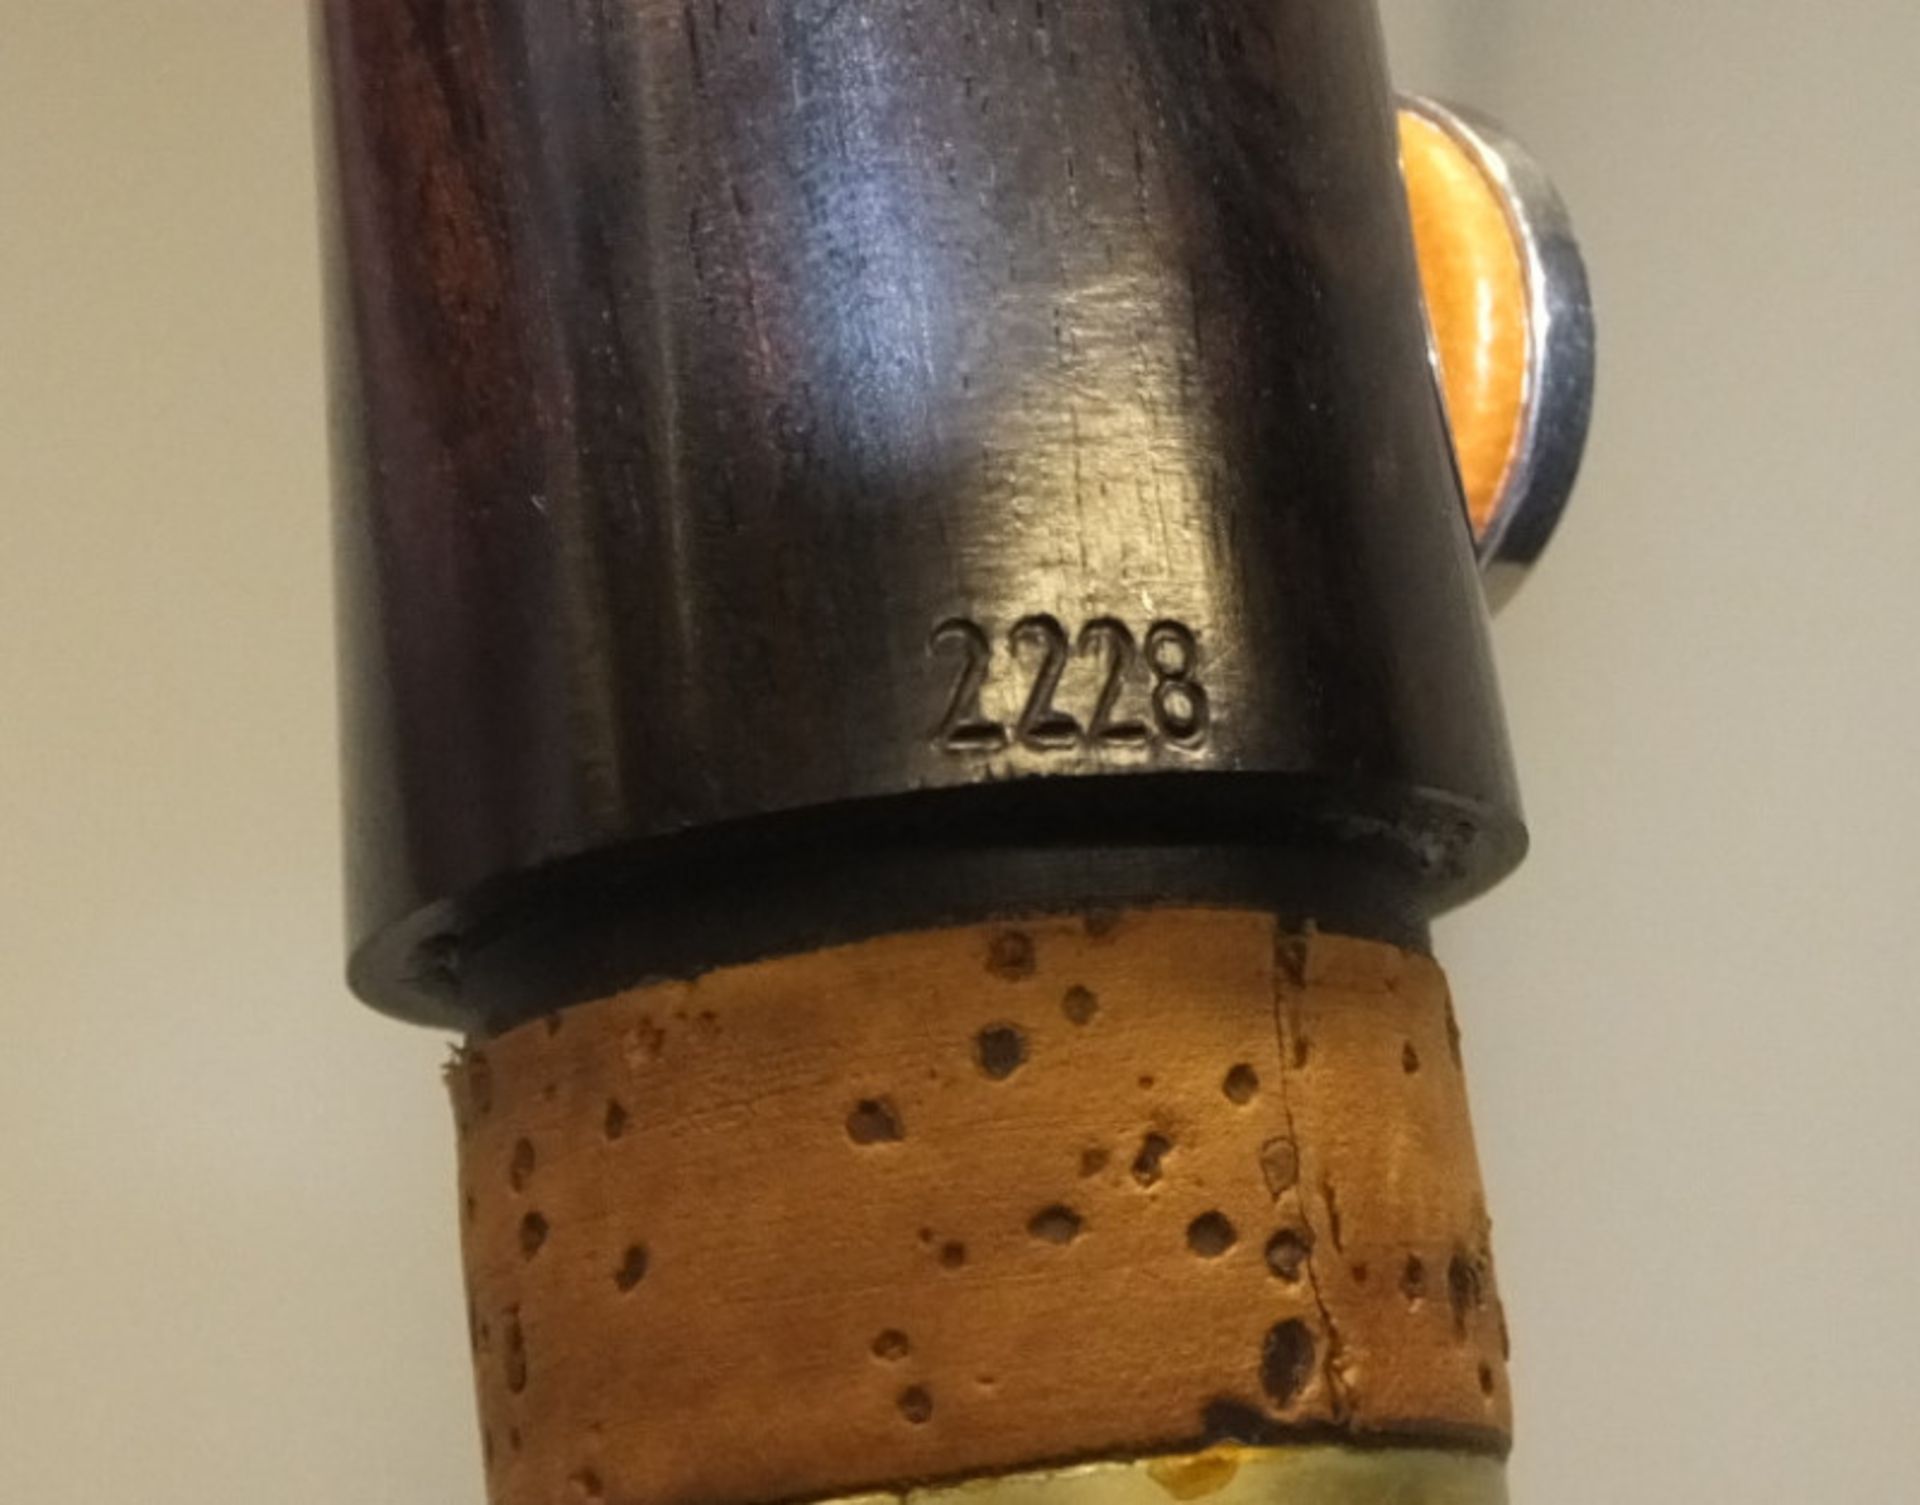 Howarth S2 Clarinet in case - Serial Number - 2228. - Image 16 of 17